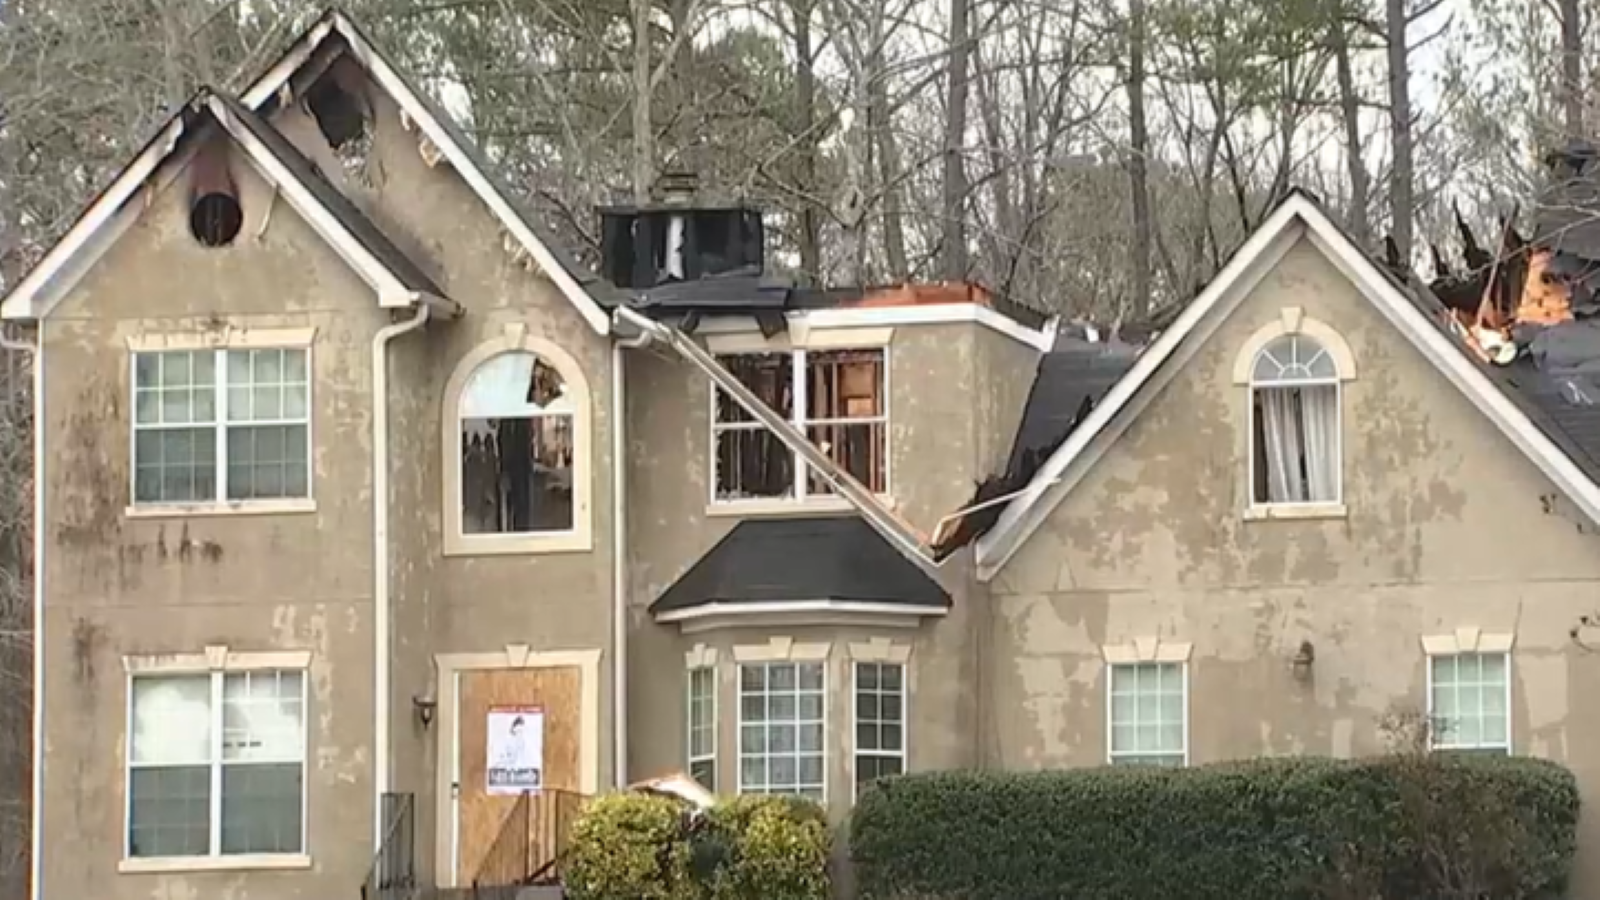 Firefighters say an 11-year-old girl's awareness likely saved her family from an early morning hous...